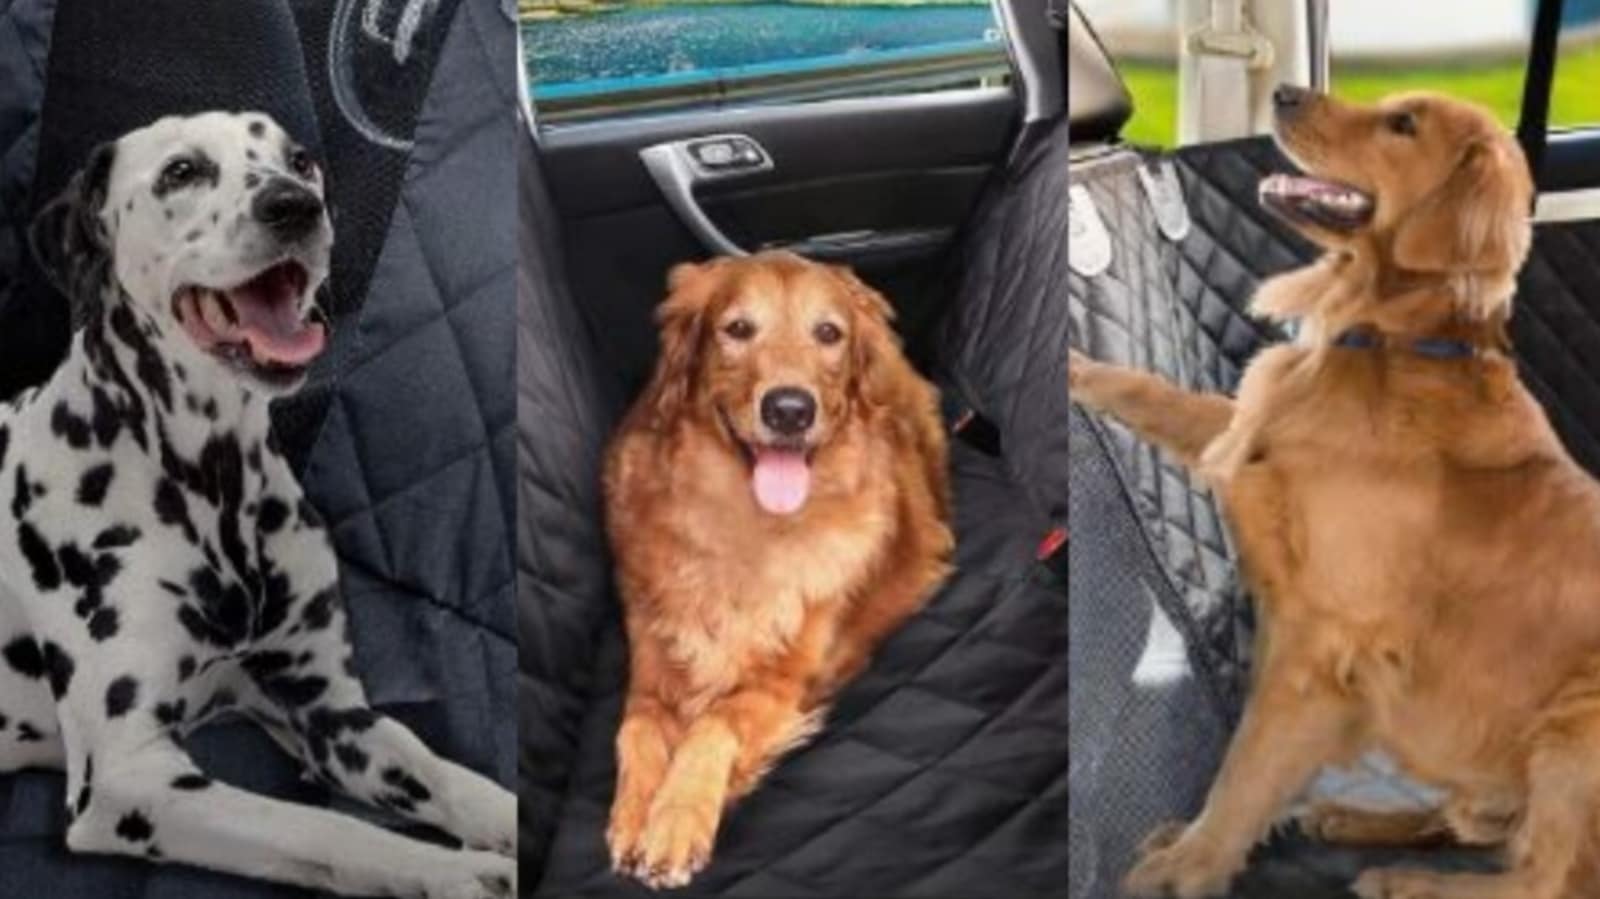 https://images.hindustantimes.com/img/2022/11/15/1600x900/dog_car_seat_covers_1668509125727_1668509183183_1668509183183.jpg